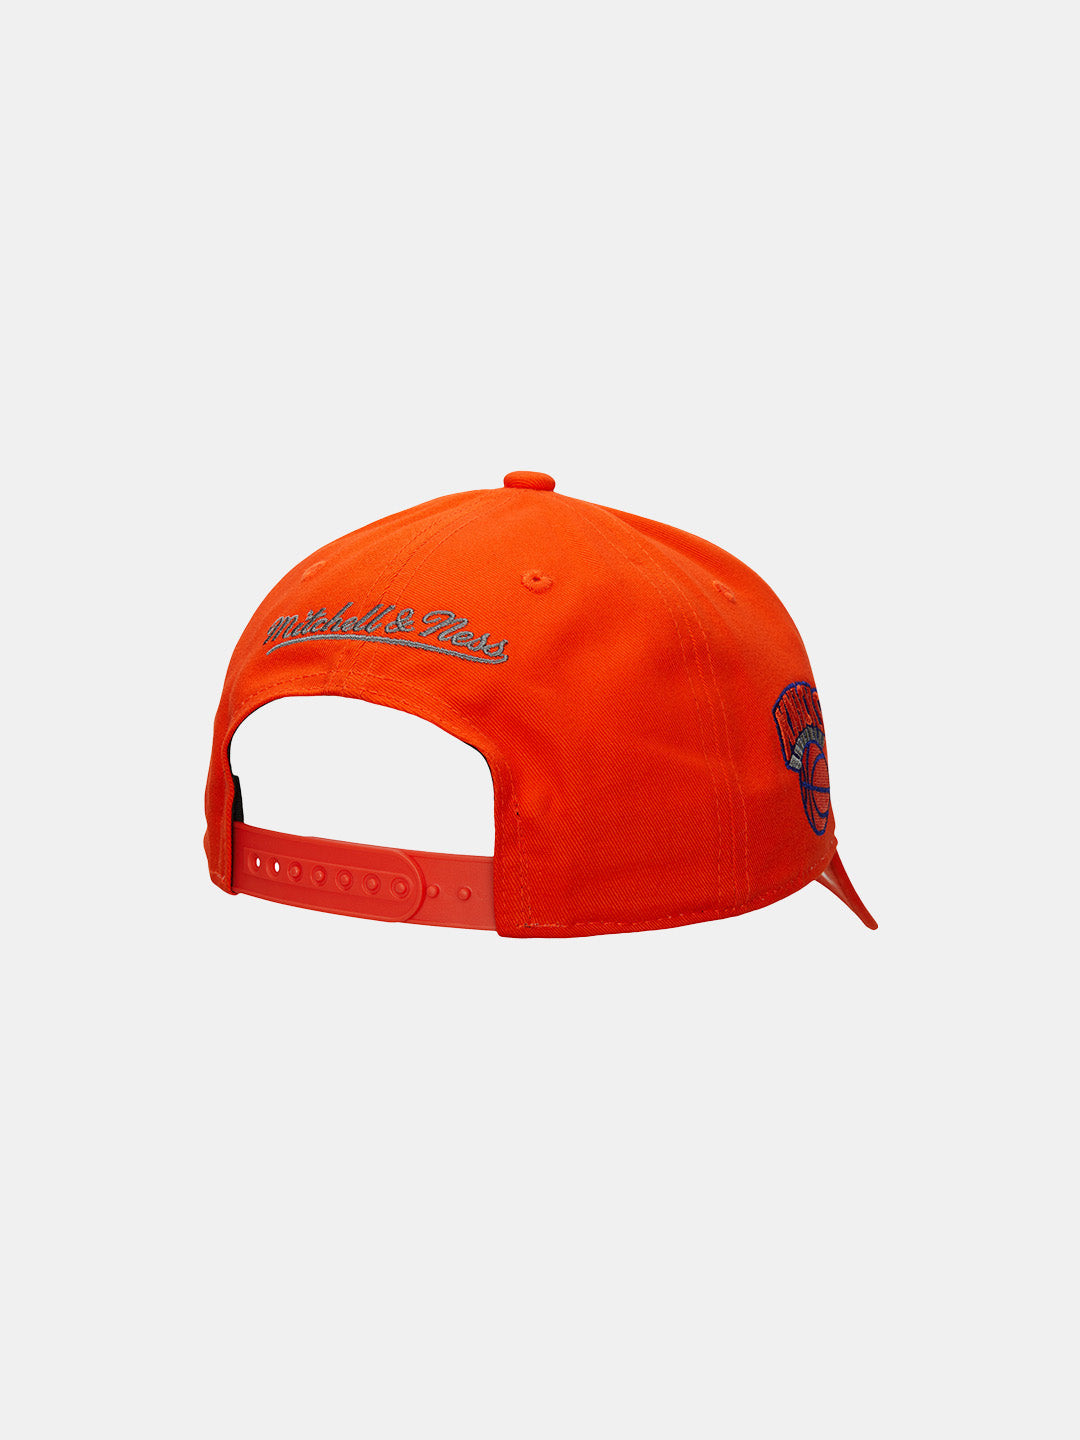 back view of the hat showing the snapback